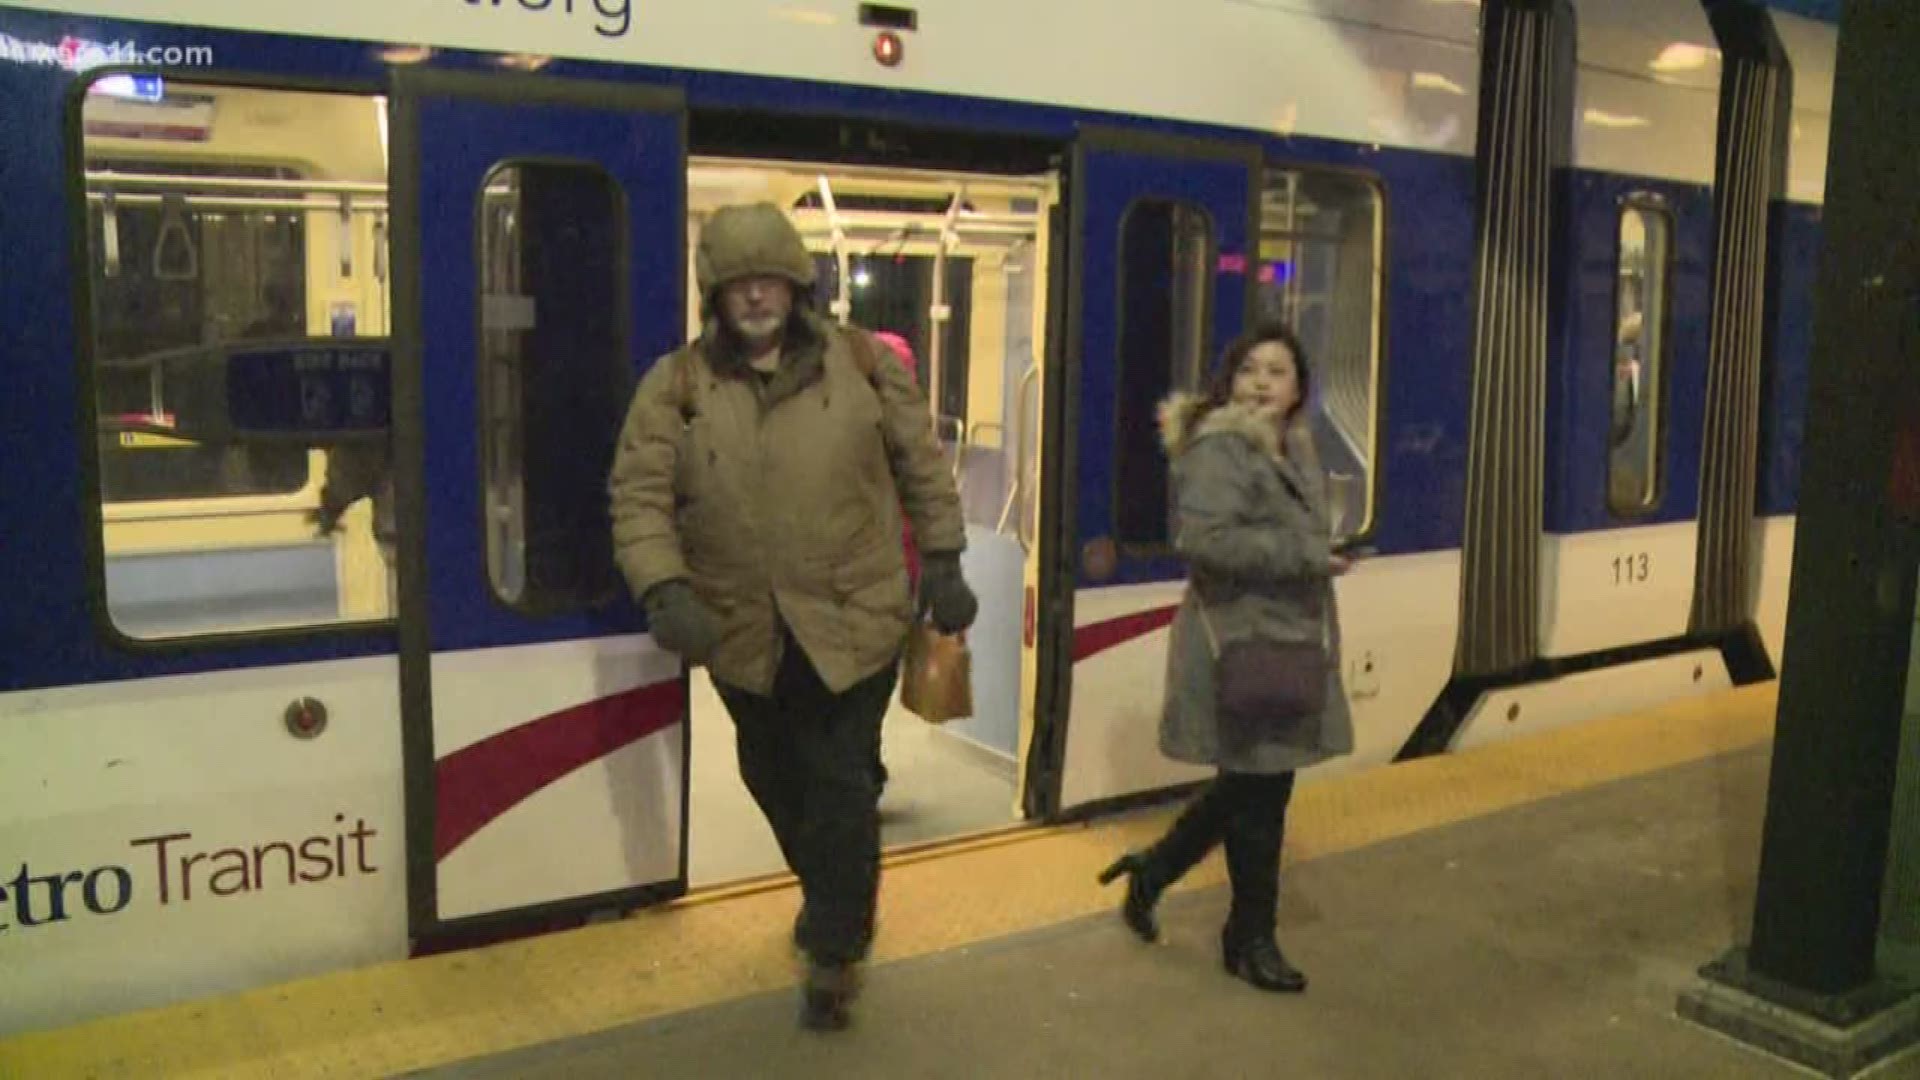 With ridership numbers continuing to climb we wanted to know how Metro Transit plans to keep riders safe.